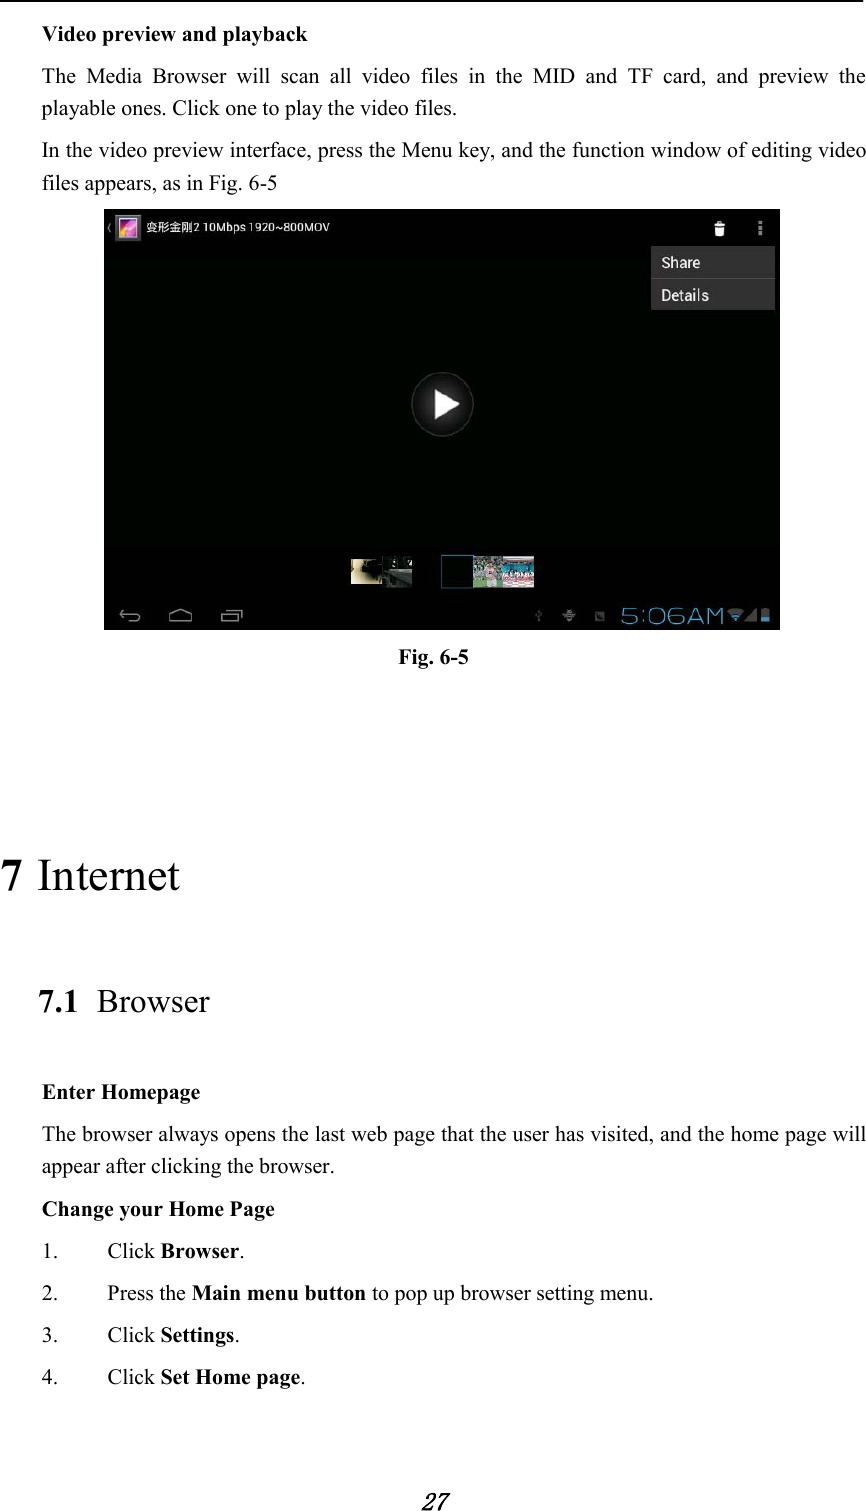            27 Video preview and playback The Media Browser will scan all video files in the MID and TF card, and preview the playable ones. Click one to play the video files. In the video preview interface, press the Menu key, and the function window of editing video files appears, as in Fig. 6-5  Fig. 6-5   7 Internet 7.1 Browser Enter Homepage The browser always opens the last web page that the user has visited, and the home page will appear after clicking the browser. Change your Home Page 1.   Click Browser. 2.   Press the Main menu button to pop up browser setting menu. 3.   Click Settings. 4.   Click Set Home page. 